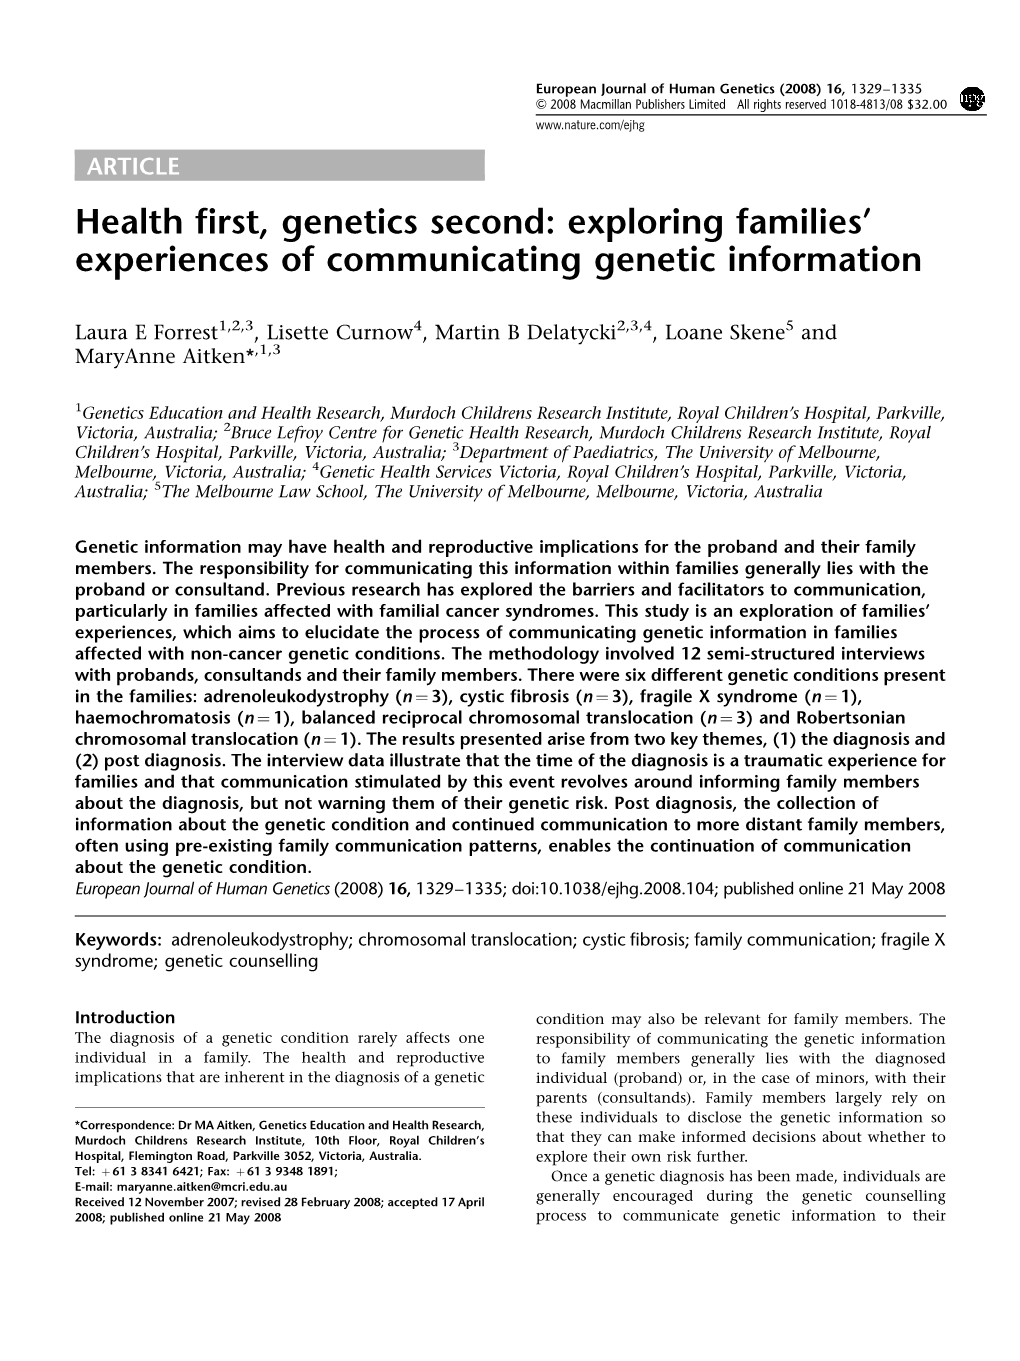 Exploring Families' Experiences of Communicating Genetic Information